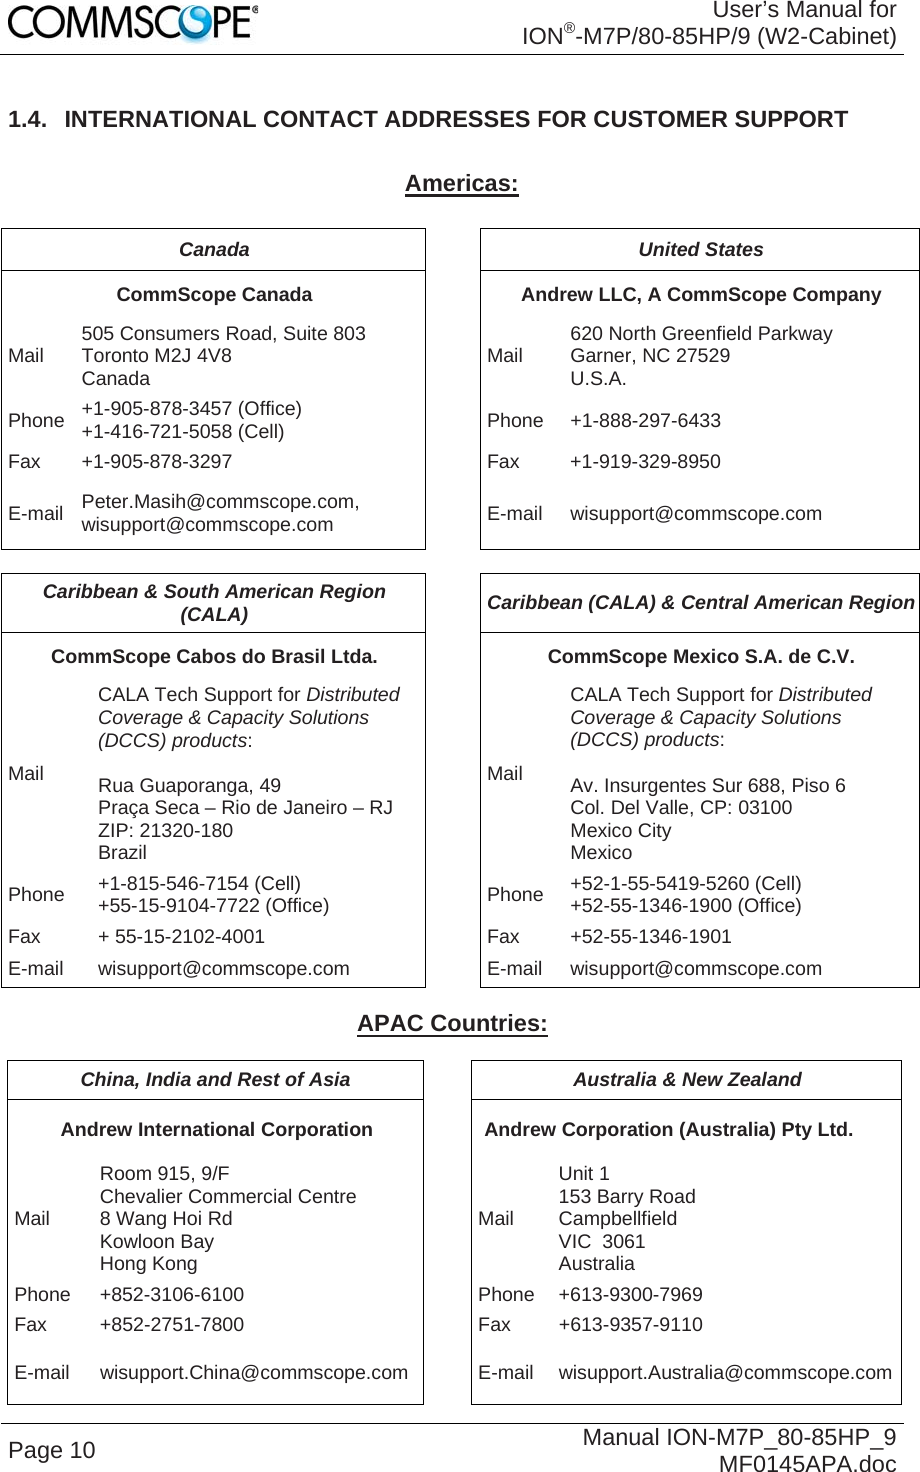 User’s Manual for ION®-M7P/80-85HP/9 (W2-Cabinet) Page 10  Manual ION-M7P_80-85HP_9 MF0145APA.doc 1.4.  INTERNATIONAL CONTACT ADDRESSES FOR CUSTOMER SUPPORT  Americas:  Canada  United States CommScope Canada  Andrew LLC, A CommScope Company Mail  505 Consumers Road, Suite 803  Toronto M2J 4V8  Canada  Mail  620 North Greenfield Parkway Garner, NC 27529 U.S.A. Phone  +1-905-878-3457 (Office) +1-416-721-5058 (Cell) Phone +1-888-297-6433 Fax +1-905-878-3297  Fax  +1-919-329-8950 E-mail  Peter.Masih@commscope.com, wisupport@commscope.com  E-mail wisupport@commscope.com  Caribbean &amp; South American Region (CALA)  Caribbean (CALA) &amp; Central American Region CommScope Cabos do Brasil Ltda.  CommScope Mexico S.A. de C.V. Mail CALA Tech Support for Distributed Coverage &amp; Capacity Solutions (DCCS) products:  Rua Guaporanga, 49 Praça Seca – Rio de Janeiro – RJ ZIP: 21320-180 Brazil Mail CALA Tech Support for Distributed Coverage &amp; Capacity Solutions (DCCS) products:  Av. Insurgentes Sur 688, Piso 6 Col. Del Valle, CP: 03100 Mexico City Mexico Phone  +1-815-546-7154 (Cell) +55-15-9104-7722 (Office)  Phone  +52-1-55-5419-5260 (Cell) +52-55-1346-1900 (Office) Fax + 55-15-2102-4001  Fax +52-55-1346-1901 E-mail wisupport@commscope.com  E-mail wisupport@commscope.com  APAC Countries:  China, India and Rest of Asia  Australia &amp; New Zealand Andrew International Corporation  Andrew Corporation (Australia) Pty Ltd. Mail Room 915, 9/F  Chevalier Commercial Centre 8 Wang Hoi Rd Kowloon Bay  Hong Kong Mail Unit 1 153 Barry Road Campbellfield  VIC  3061 Australia Phone +852-3106-6100  Phone +613-9300-7969Fax +852-2751-7800  Fax +613-9357-9110 E-mail wisupport.China@commscope.com E-mail wisupport.Australia@commscope.com